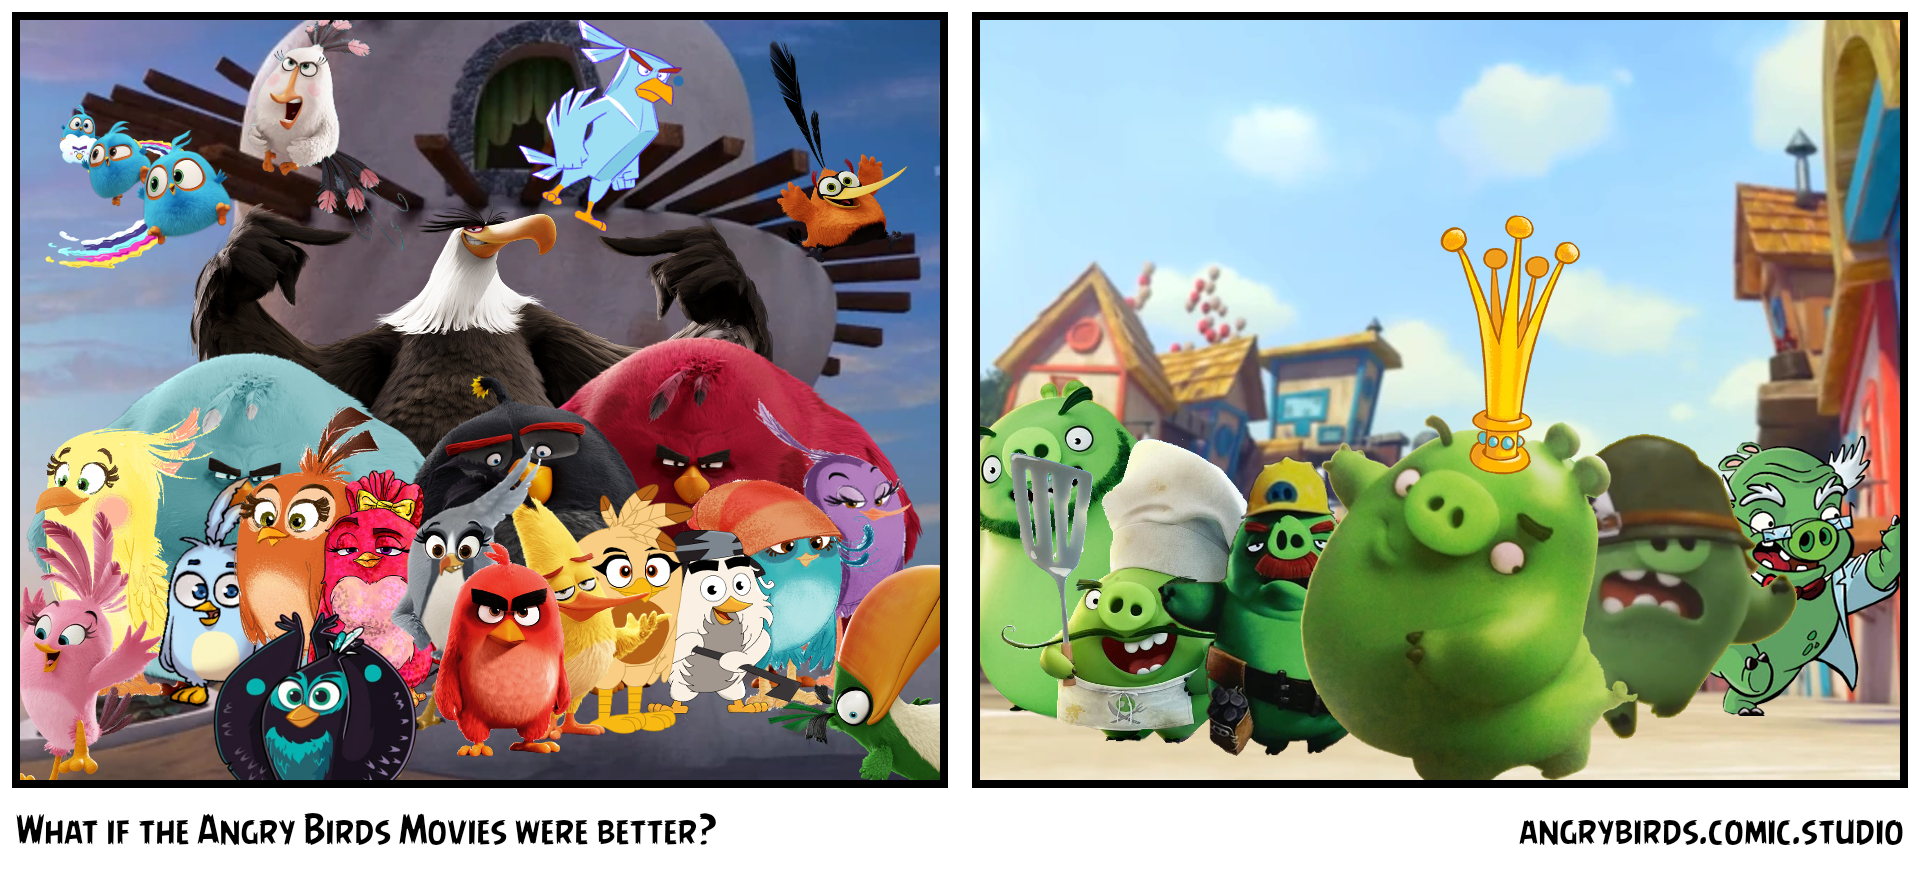 What if the Angry Birds Movies were better?